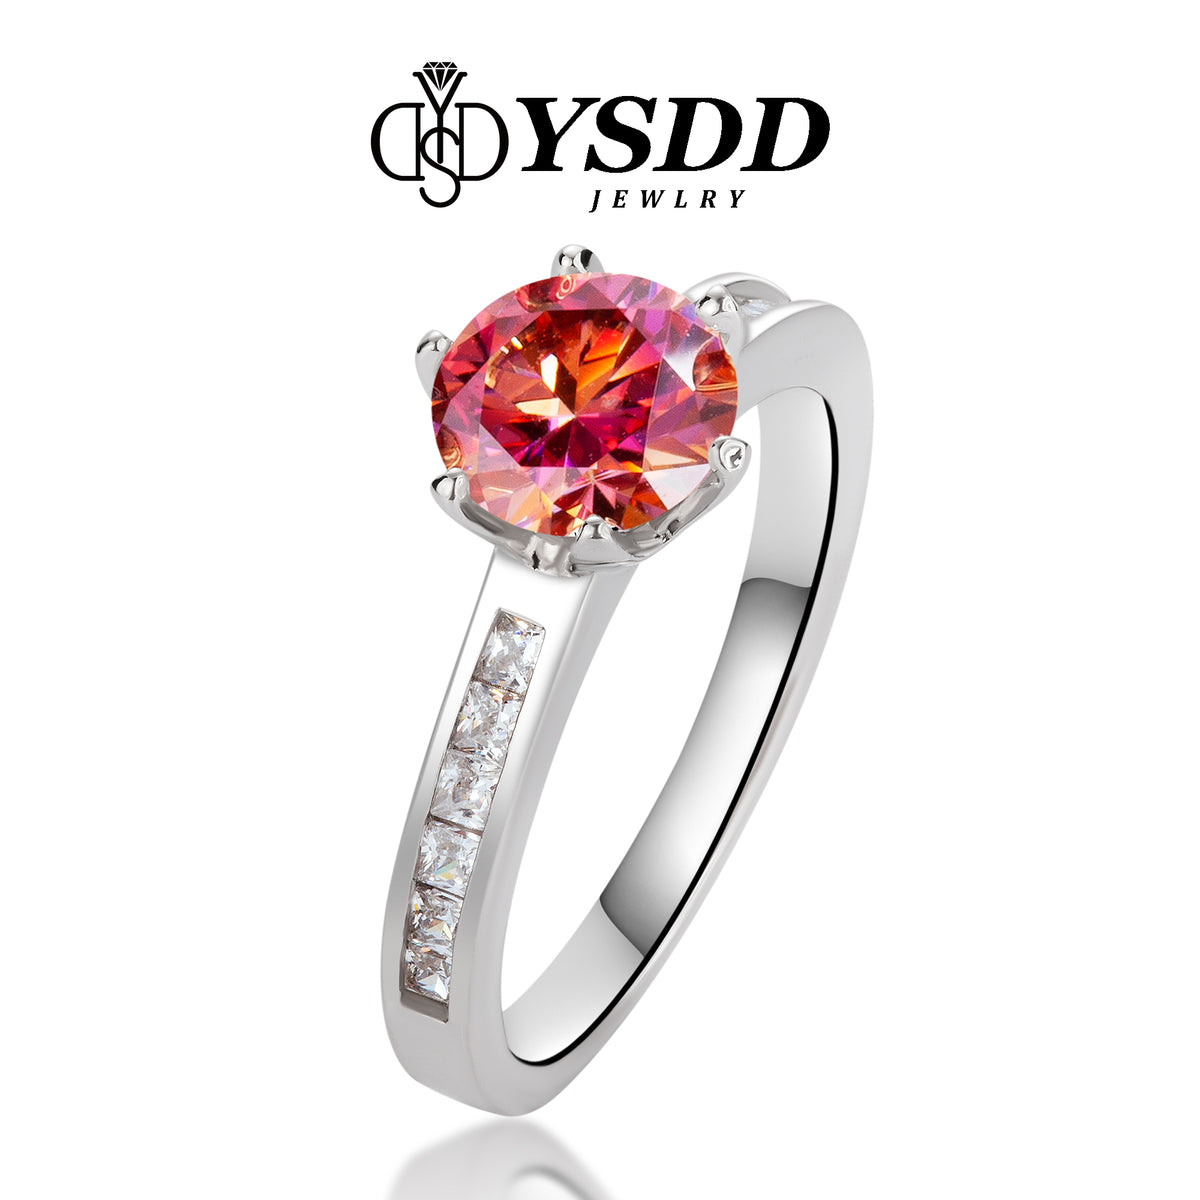 【#173 YSDD】1CT Colored Moissanite Rings in s925